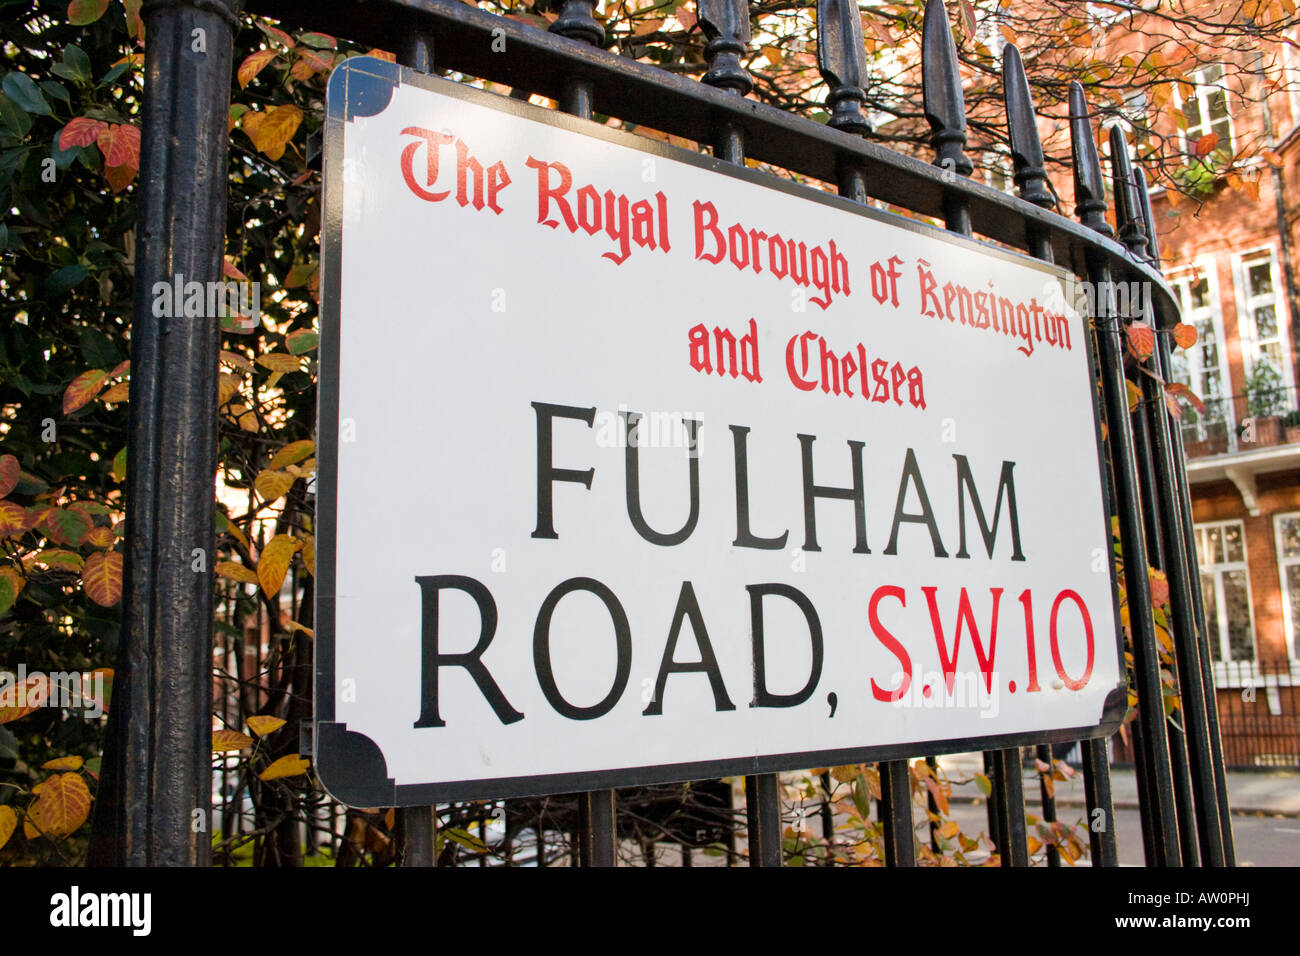 Fulham Road London SW10 street name sign Stock Photo